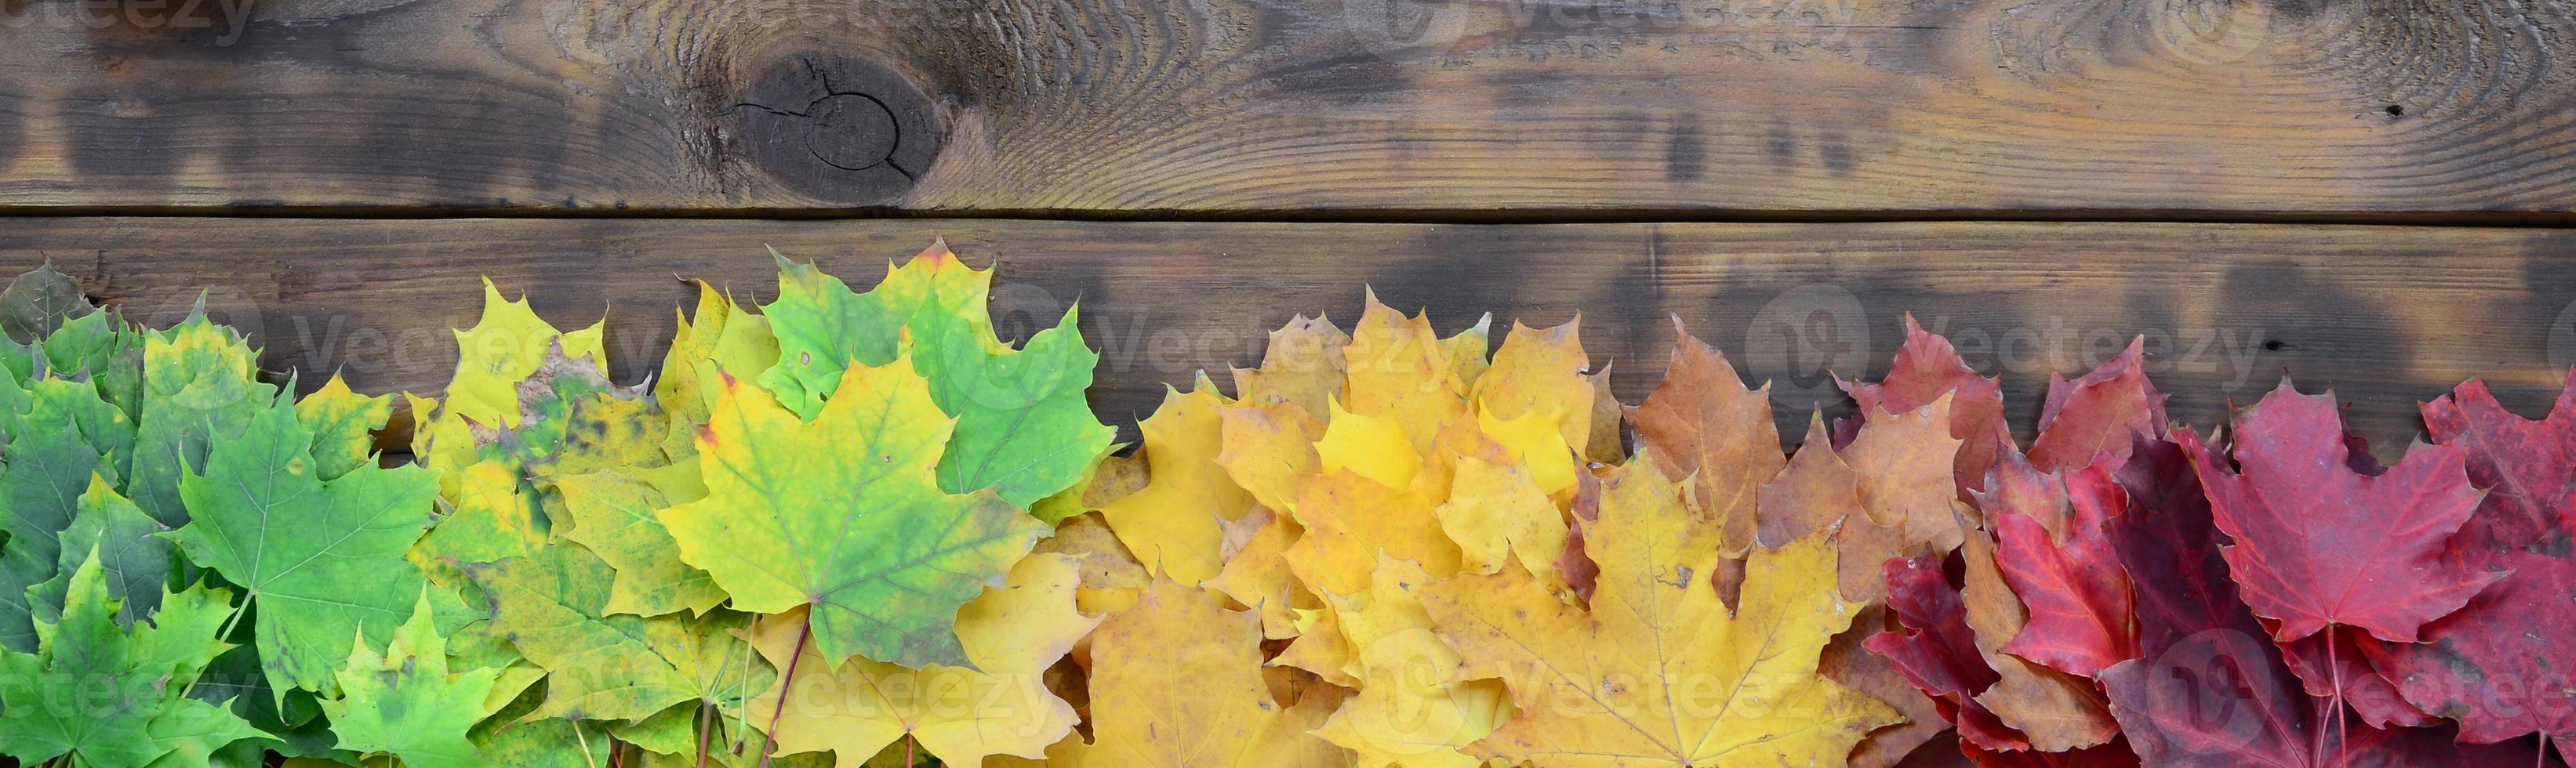 Composition of many yellowing fallen autumn leaves on a background surface of natural wooden boards of dark brown color photo